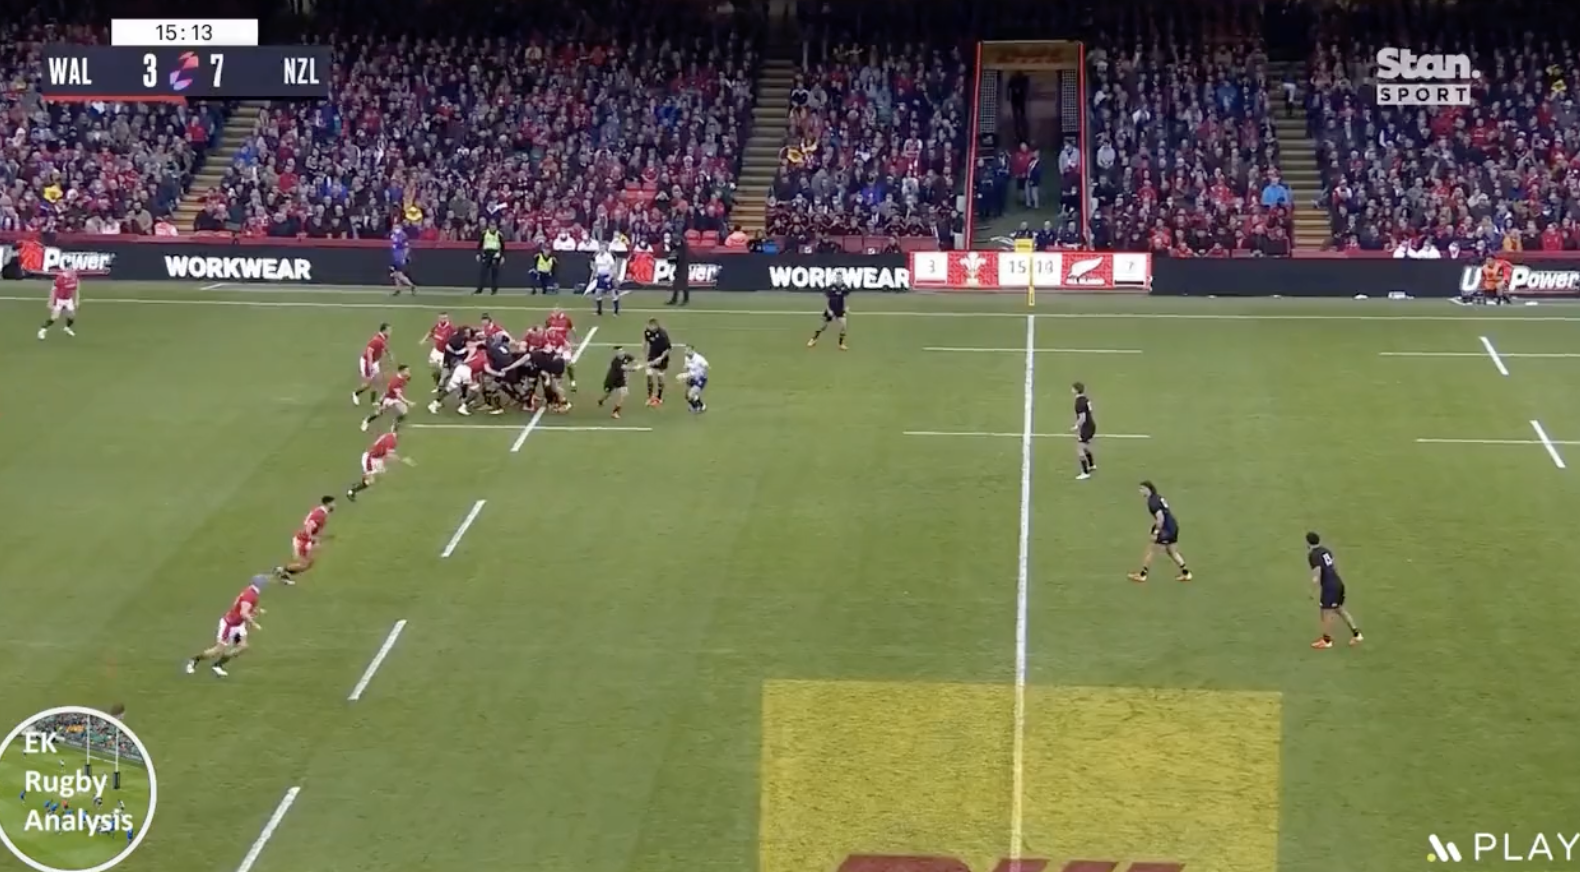 The clip that shows how easy the All Blacks make rugby look